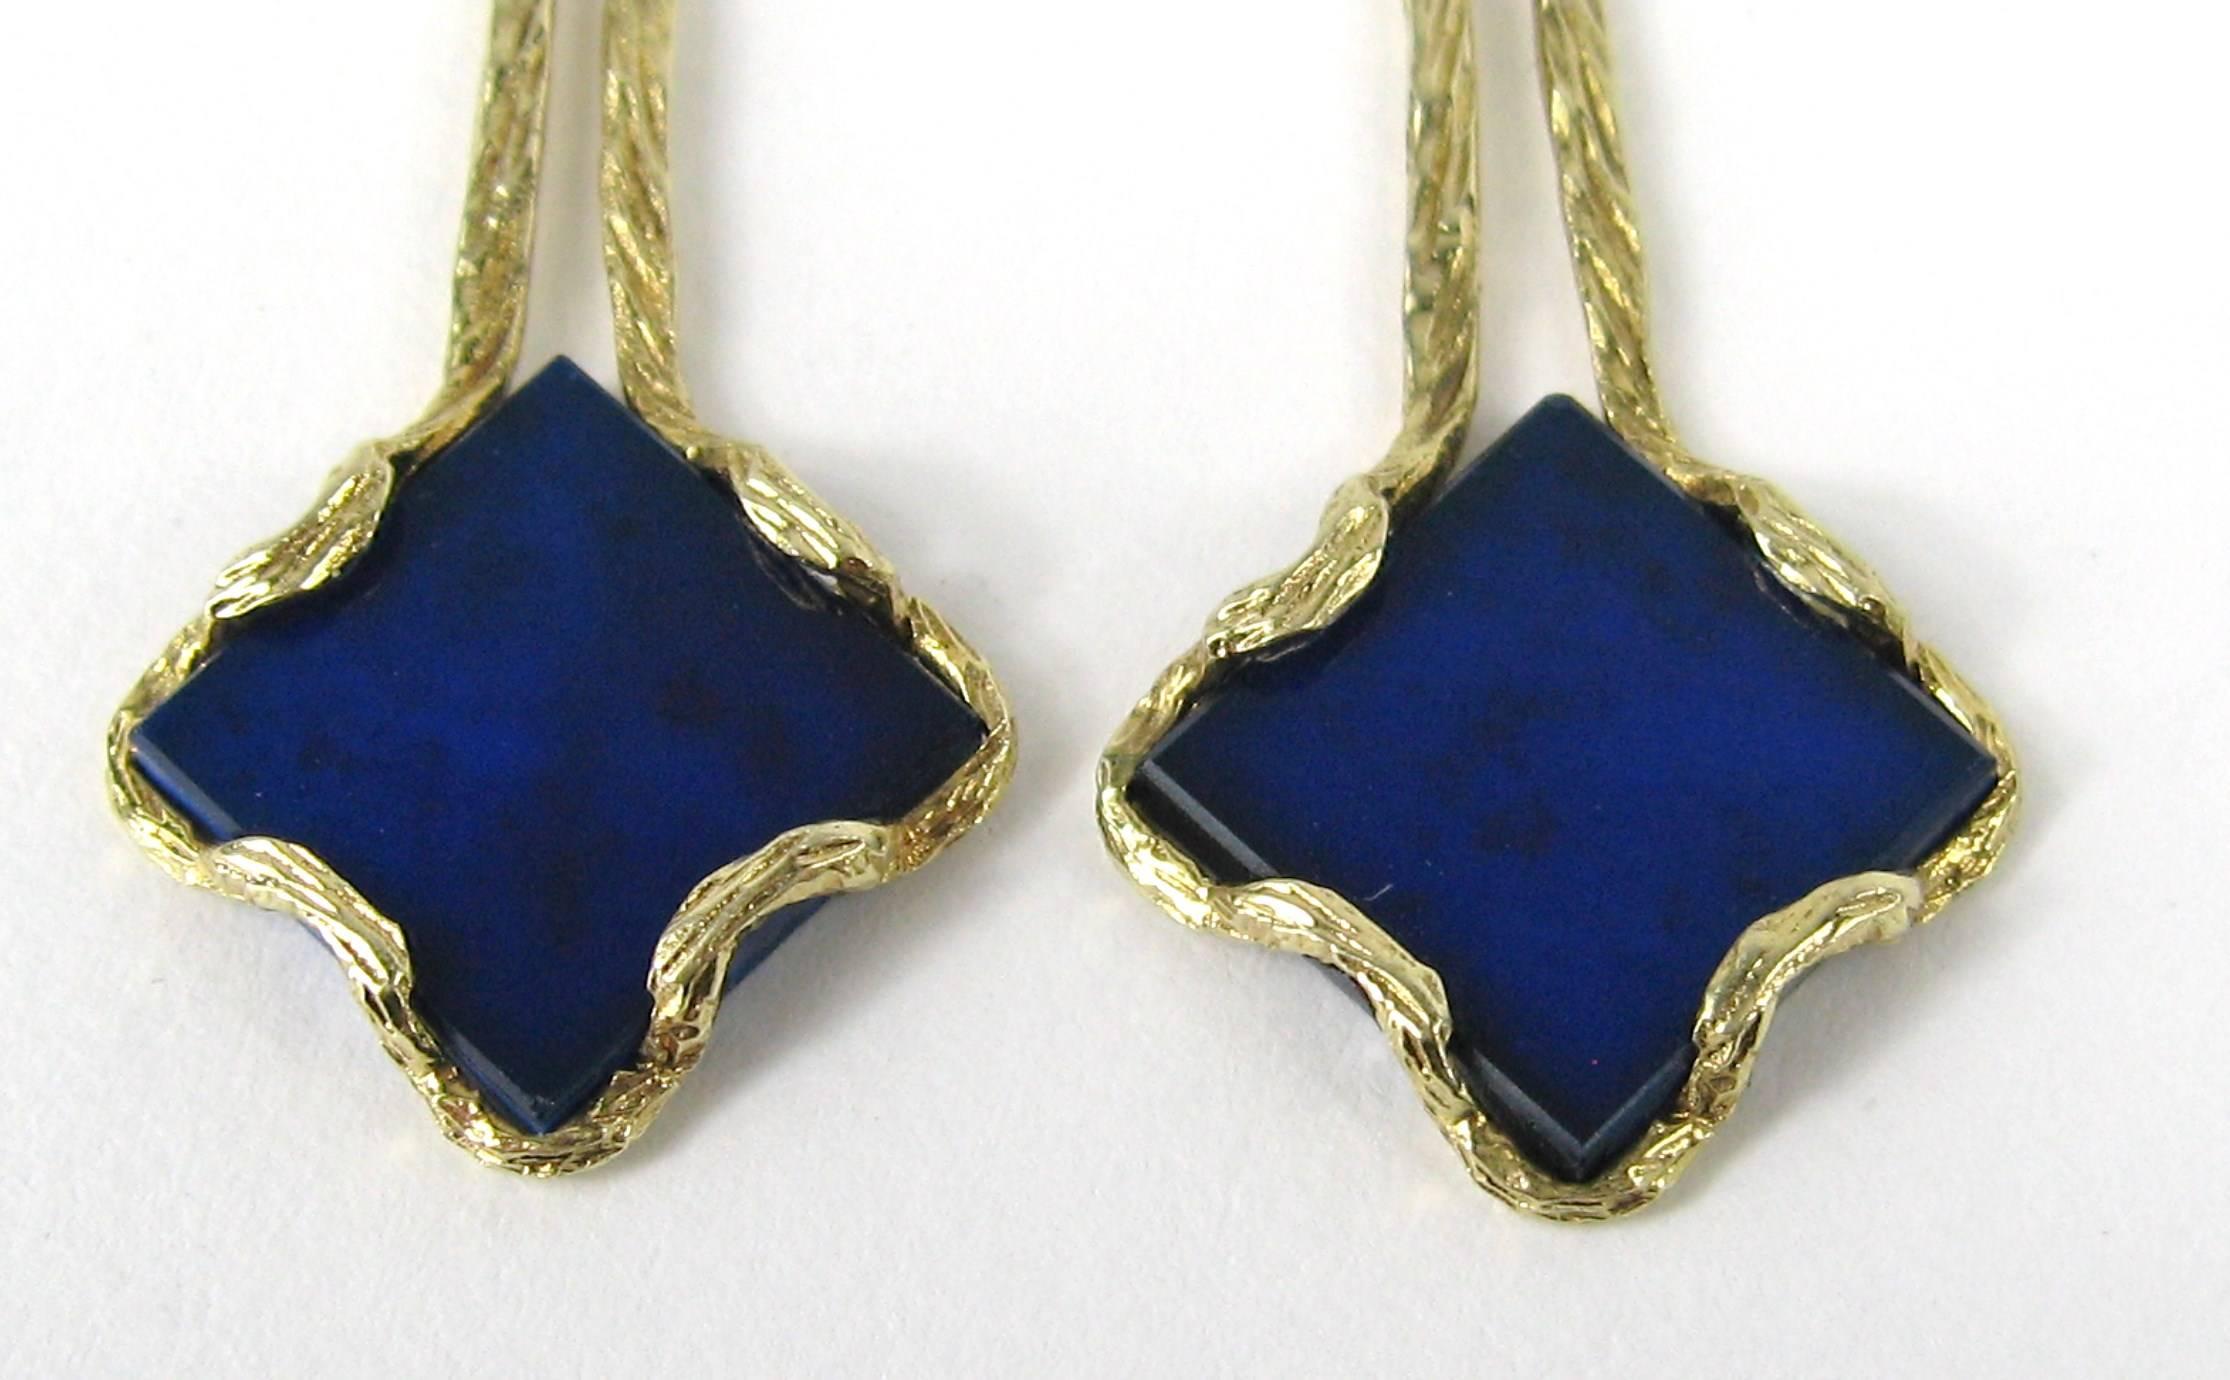 Dangle earrings Lapis Lazuli 14K Gold. Measuring 2 in Length x .71 in Wide. Costume Made pieces.   Pierced earrings.  This is out of a massive collection of Hopi, Zuni, Navajo, Southwestern, sterling silver, (costume jewelry that was not worn)  and